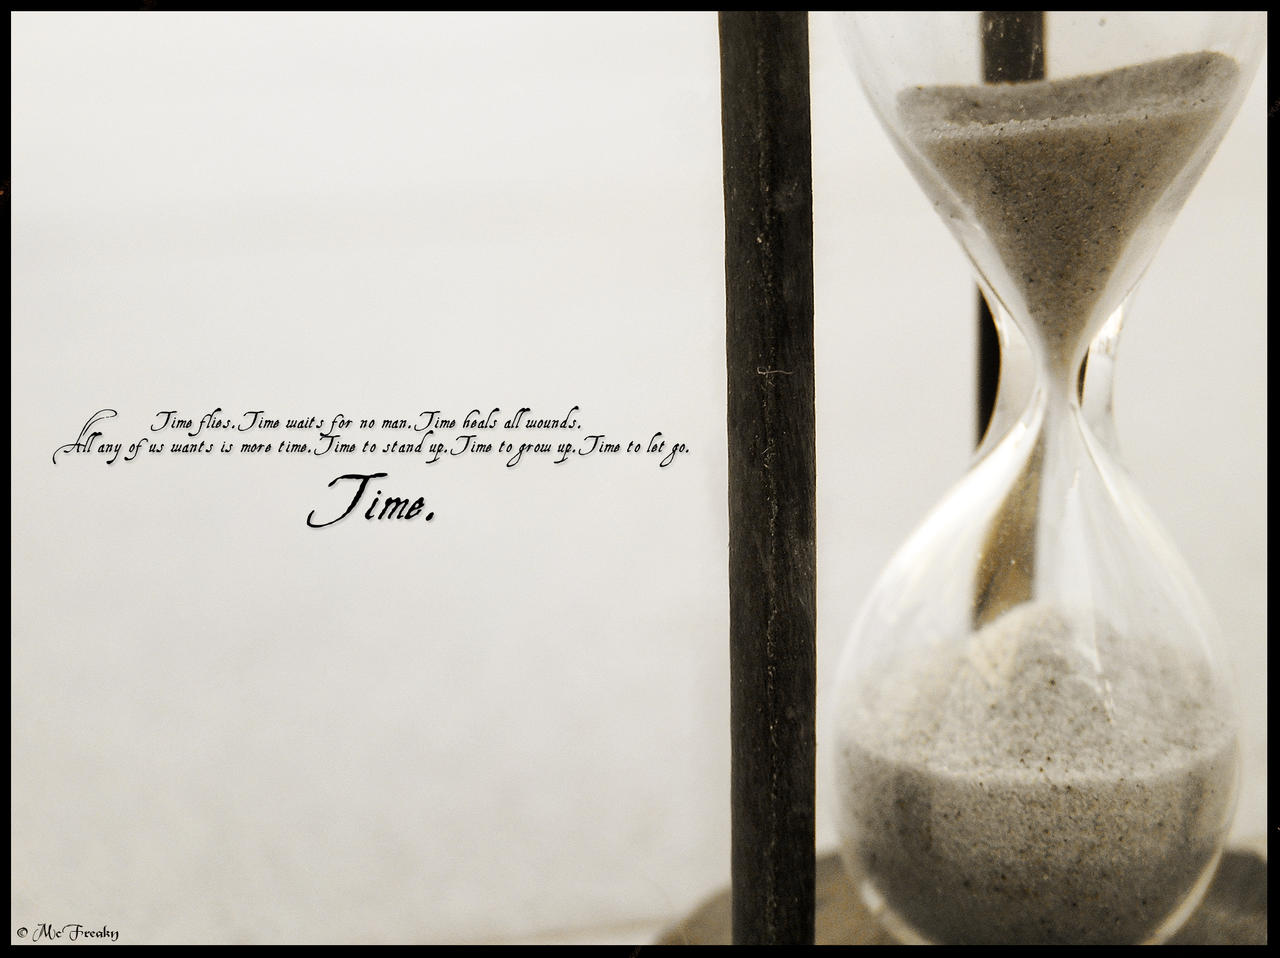 Time.